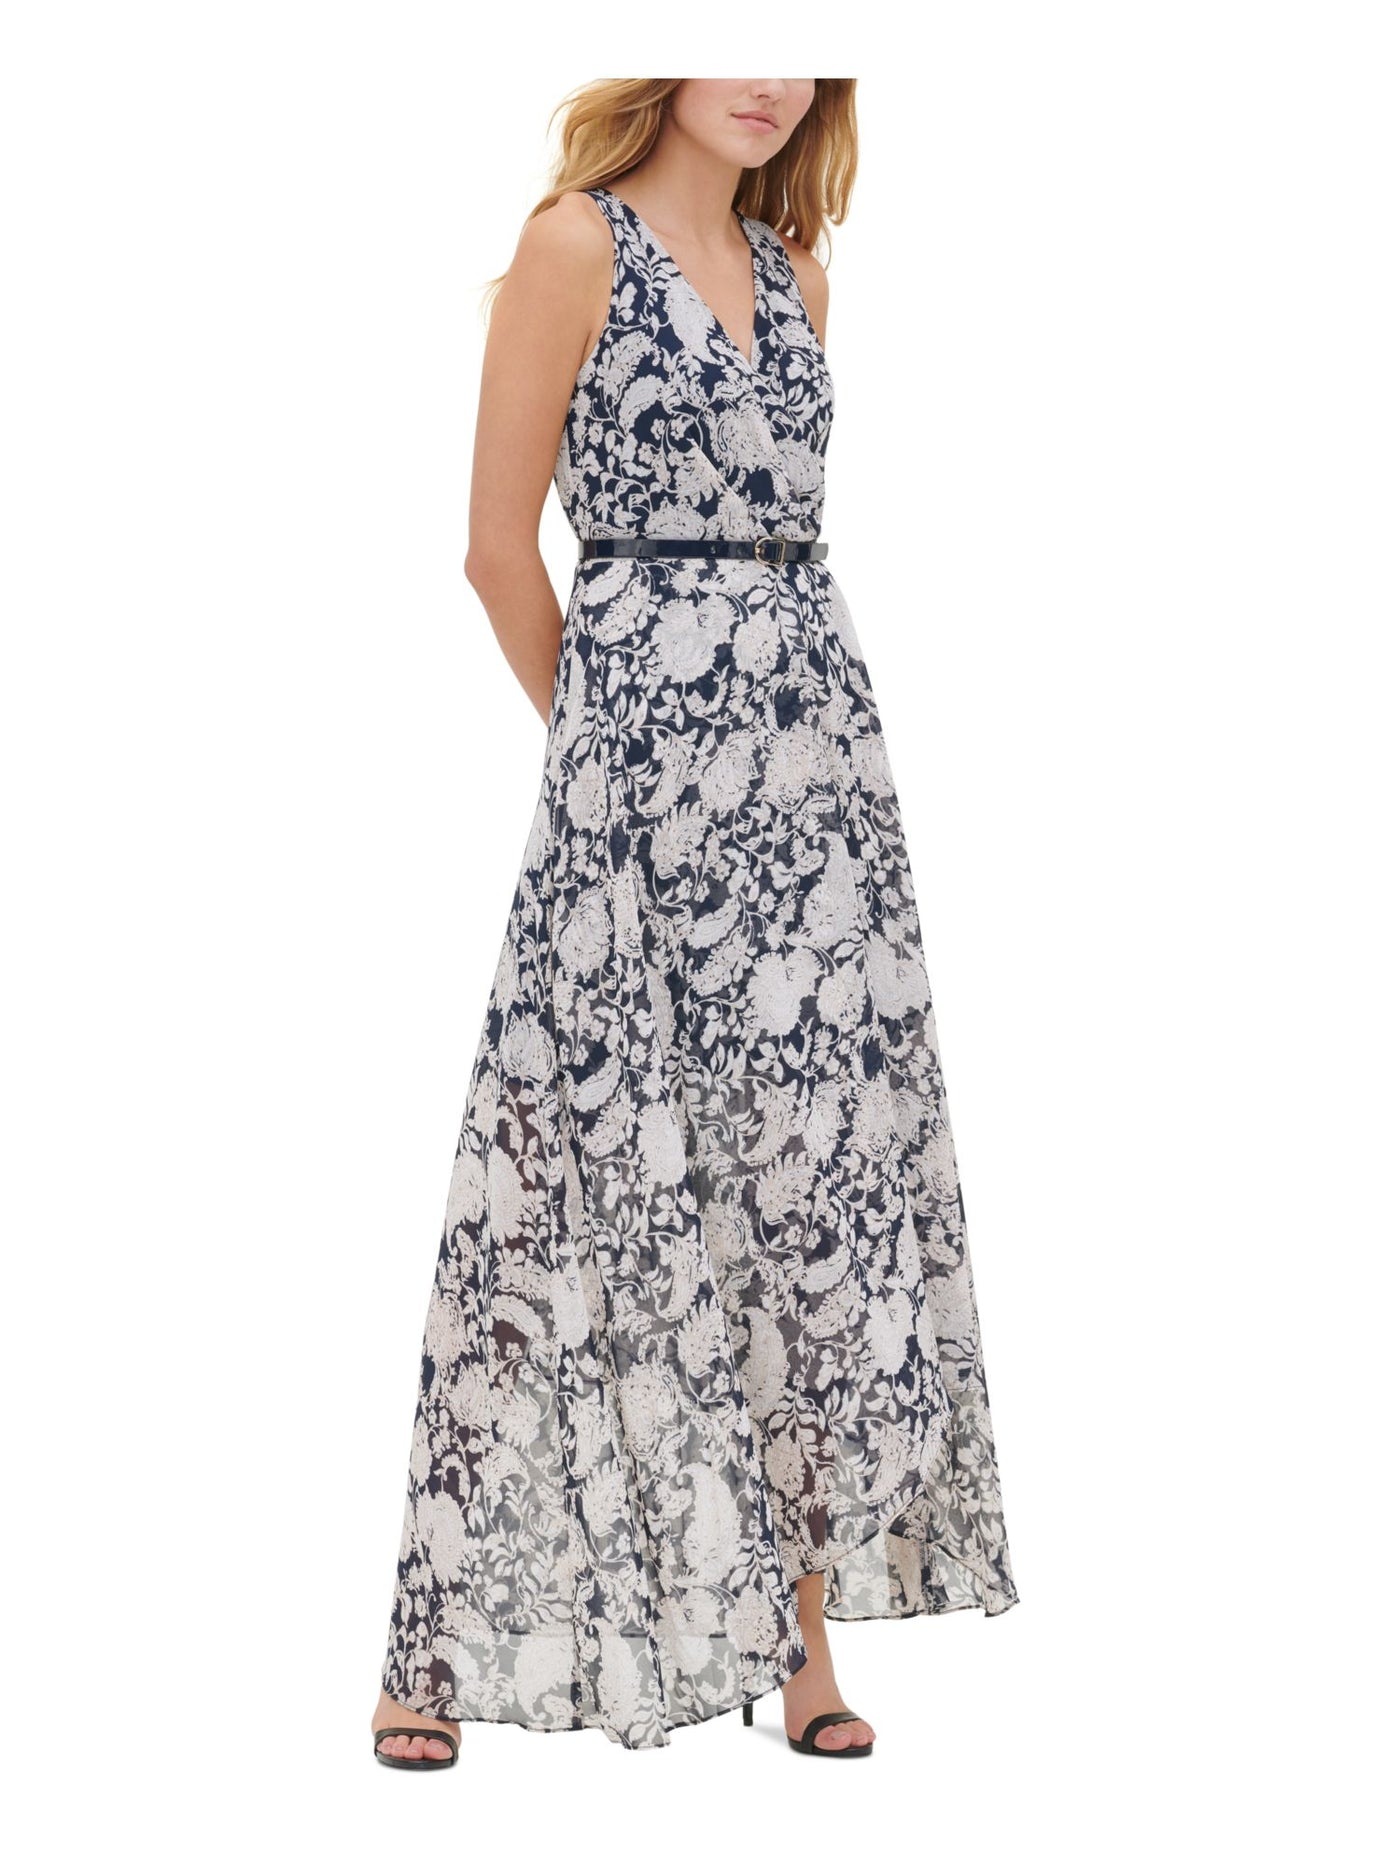 TOMMY HILFIGER Womens Navy Belted Zippered Lined Floral Sleeveless Surplice Neckline Maxi Evening Dress 8